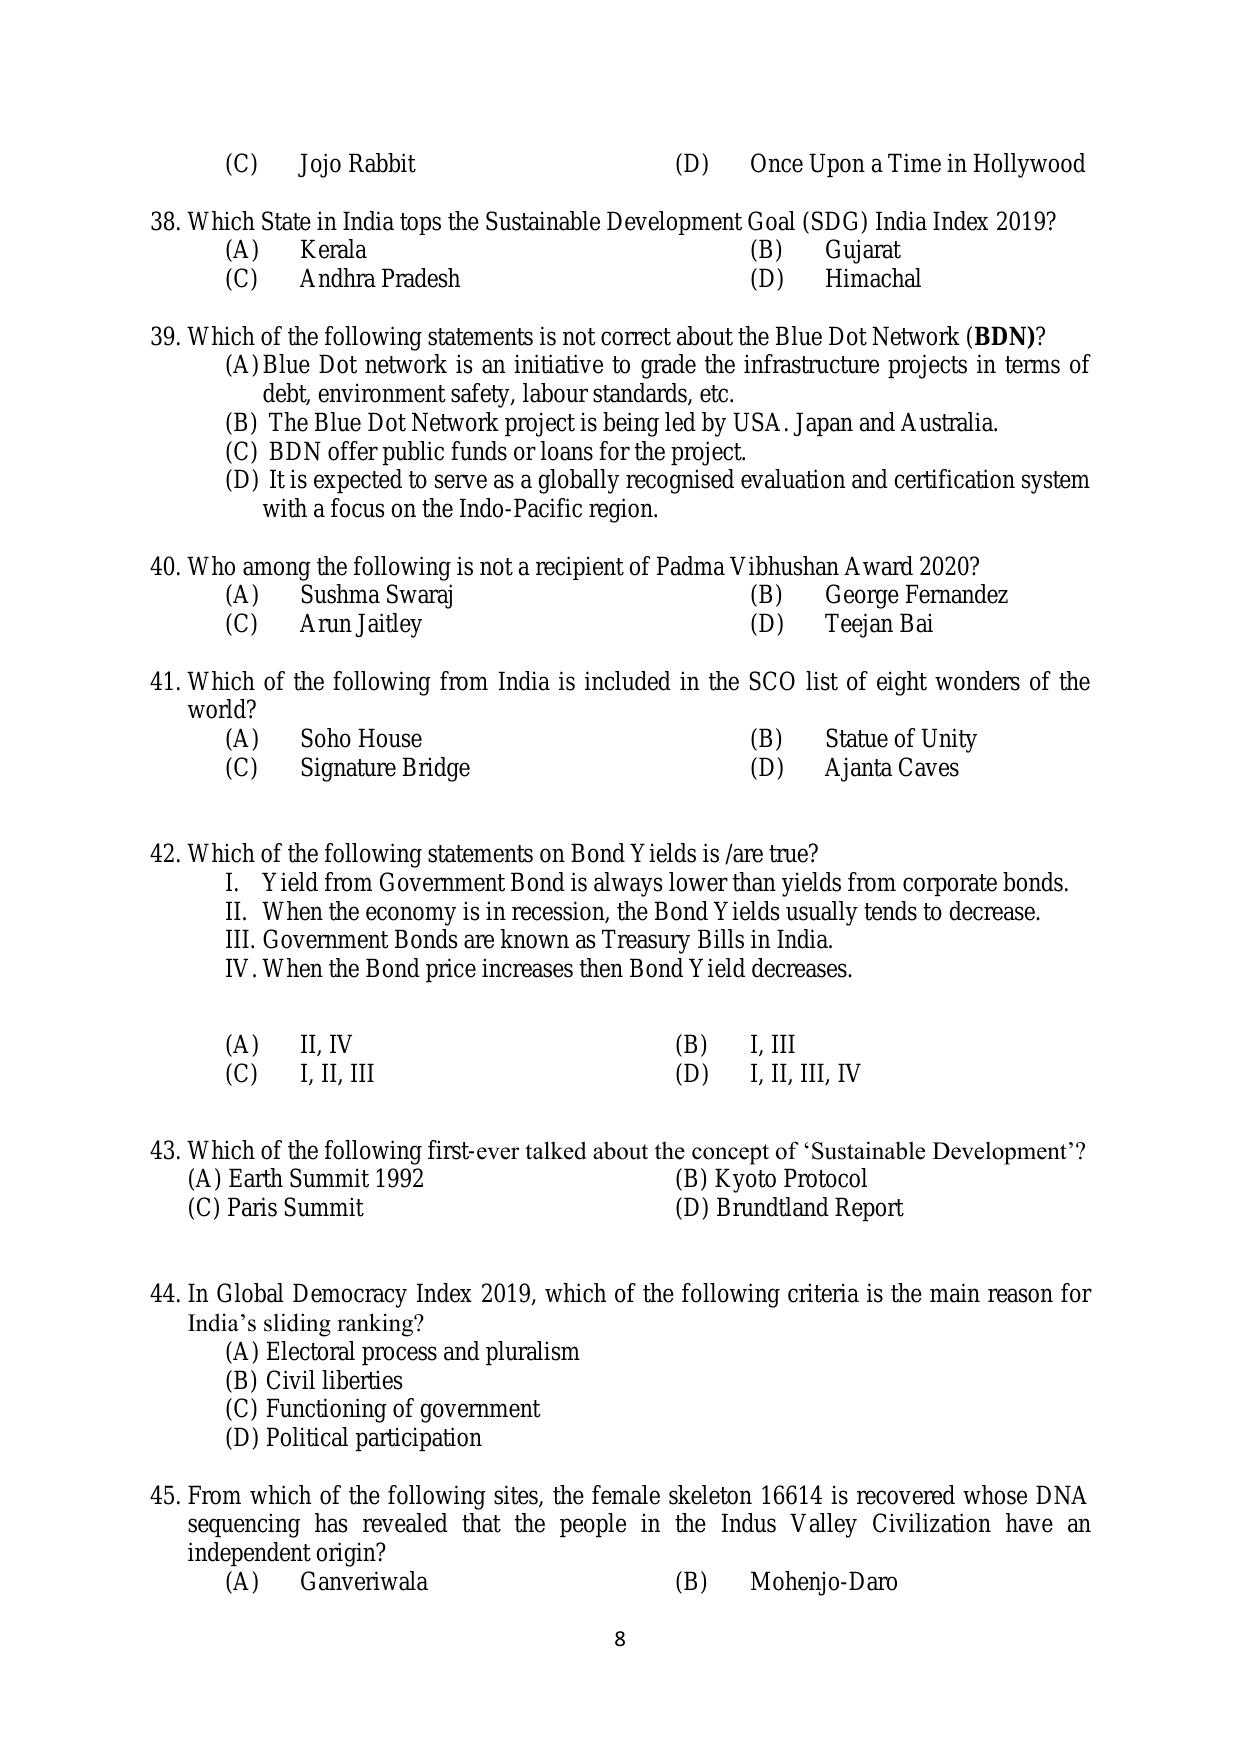 AILET 2020 Question Paper for BA LLB - Page 8